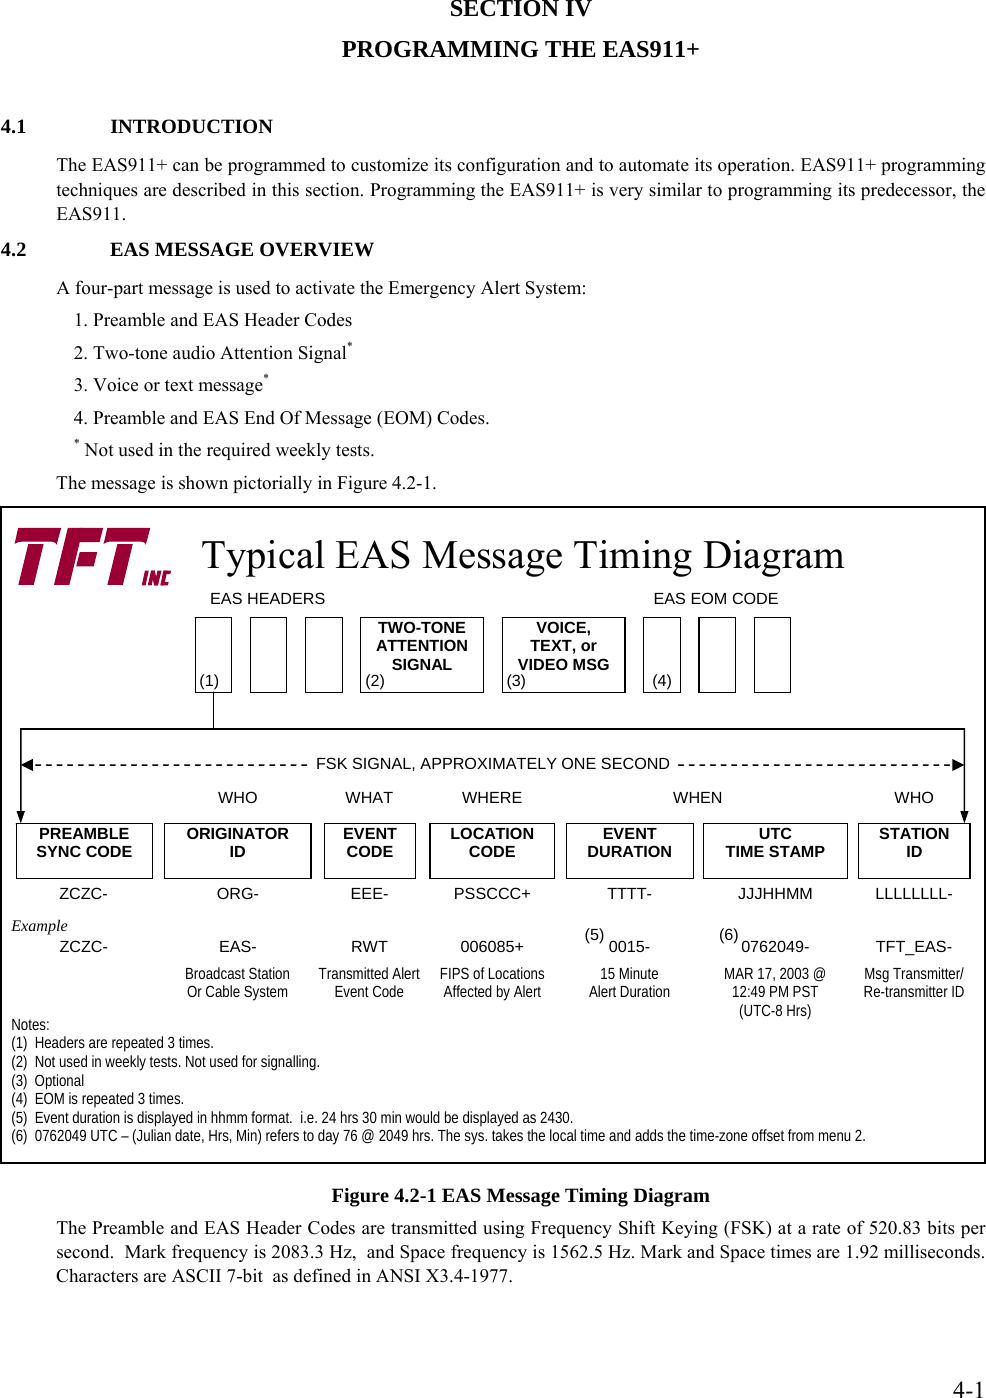  4-1SECTION IV PROGRAMMING THE EAS911+  4.1   INTRODUCTION  The EAS911+ can be programmed to customize its configuration and to automate its operation. EAS911+ programming techniques are described in this section. Programming the EAS911+ is very similar to programming its predecessor, the EAS911. 4.2  EAS MESSAGE OVERVIEW A four-part message is used to activate the Emergency Alert System: 1. Preamble and EAS Header Codes 2. Two-tone audio Attention Signal* 3. Voice or text message* 4. Preamble and EAS End Of Message (EOM) Codes.  * Not used in the required weekly tests. The message is shown pictorially in Figure 4.2-1. Figure 4.2-1 EAS Message Timing Diagram The Preamble and EAS Header Codes are transmitted using Frequency Shift Keying (FSK) at a rate of 520.83 bits per second.  Mark frequency is 2083.3 Hz,  and Space frequency is 1562.5 Hz. Mark and Space times are 1.92 milliseconds. Characters are ASCII 7-bit  as defined in ANSI X3.4-1977. Typical EAS Message Timing Diagram  Notes: (1)  Headers are repeated 3 times. (2)  Not used in weekly tests. Not used for signalling. (3)  Optional (4)  EOM is repeated 3 times. (5)  Event duration is displayed in hhmm format.  i.e. 24 hrs 30 min would be displayed as 2430. (6)  0762049 UTC – (Julian date, Hrs, Min) refers to day 76 @ 2049 hrs. The sys. takes the local time and adds the time-zone offset from menu 2. PREAMBLE SYNC CODE ORIGINATOR ID EVENTCODE LOCATIONCODE EVENTDURATION UTC TIME STAMP STATIONID WHO WHAT WHERE WHEN WHOZCZC- ORG- EEE- PSSCCC+ TTTT- JJJHHMM LLLLLLLL-FSK SIGNAL, APPROXIMATELY ONE SECONDEAS HEADERS TWO-TONE ATTENTION SIGNAL VOICE,  TEXT, or  VIDEO MSG EAS EOM CODE ExampleZCZC- EAS- RWT 006085+ 0015- 0762049- TFT_EAS-(1) (2) (3) (4)Broadcast Station Or Cable System  Transmitted Alert Event Code  FIPS of Locations Affected by Alert  15 Minute Alert Duration  MAR 17, 2003 @ 12:49 PM PST (UTC-8 Hrs) Msg Transmitter/ Re-transmitter ID (5) (6)